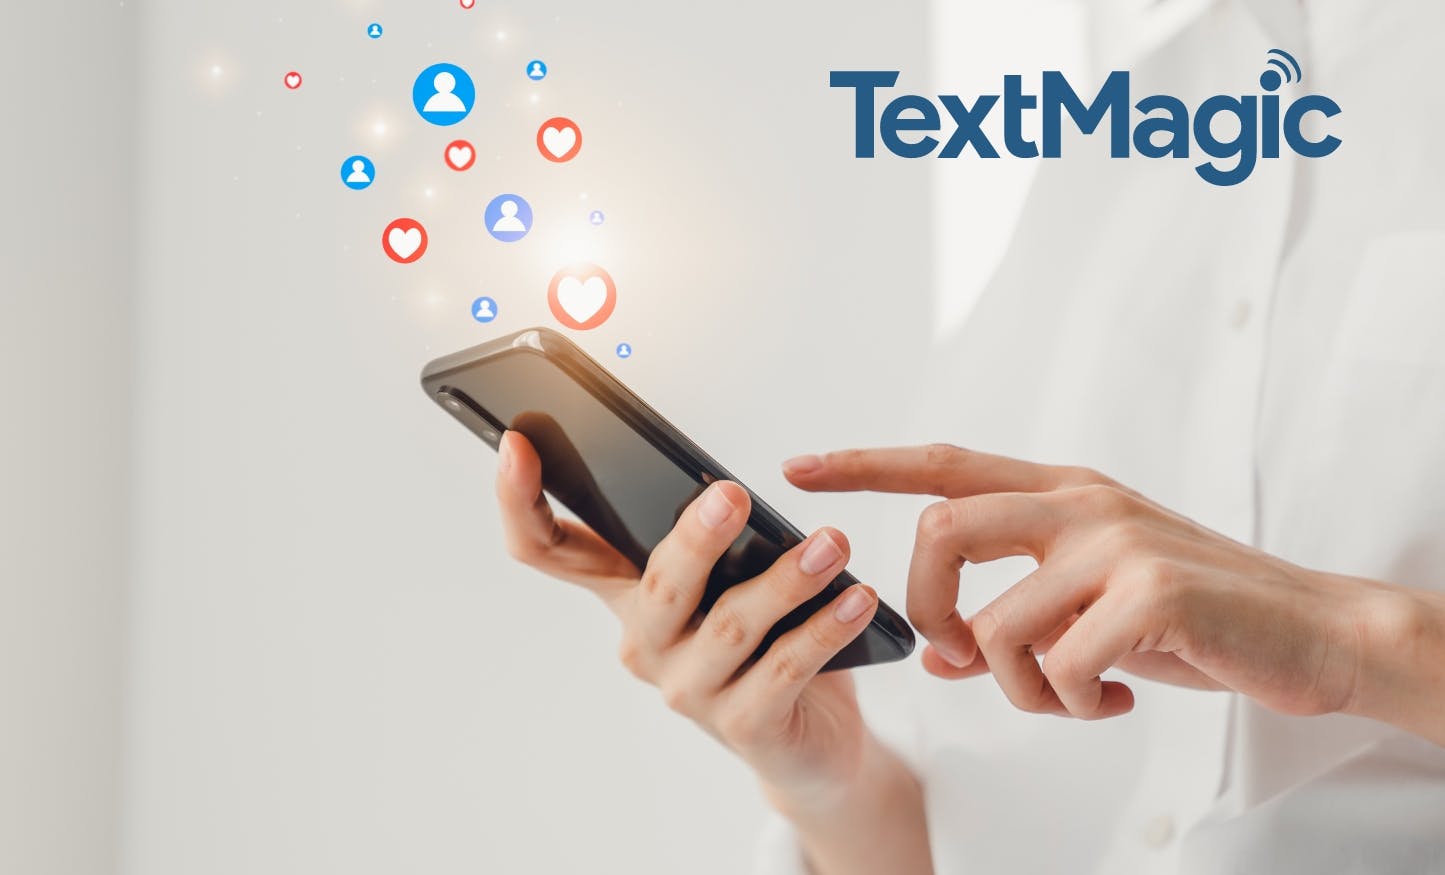 TextMagic: Review, Top Features, and Prices